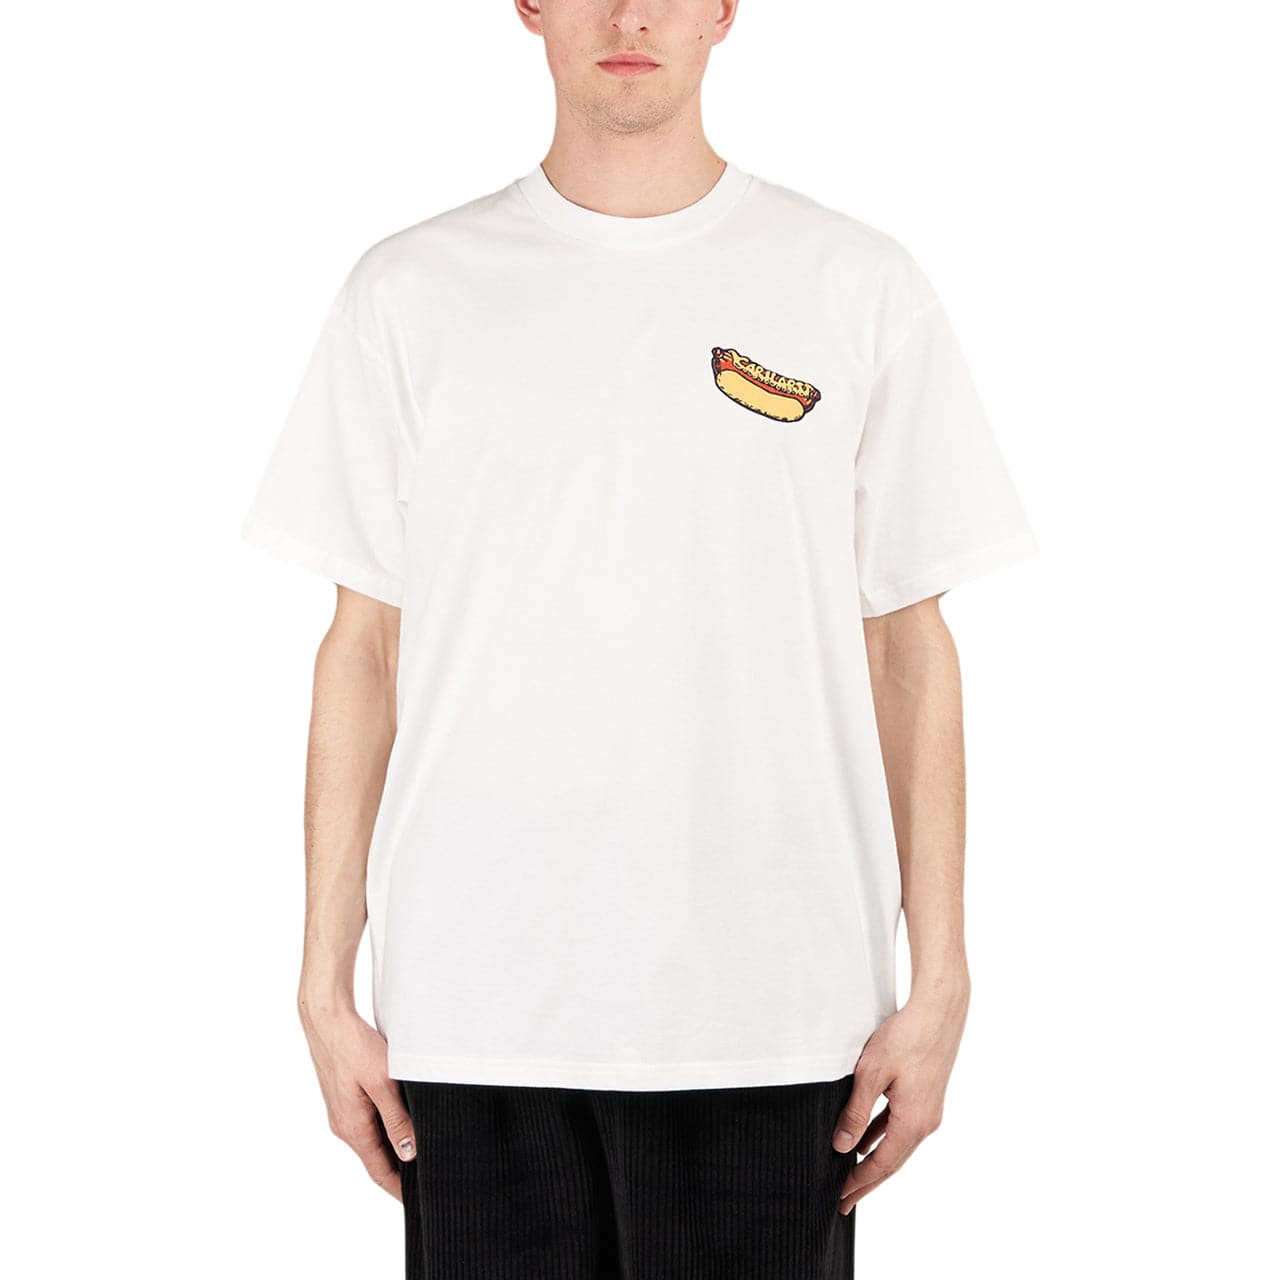 Image of Carhartt WIP S/S Flavor T-Shirt (White)